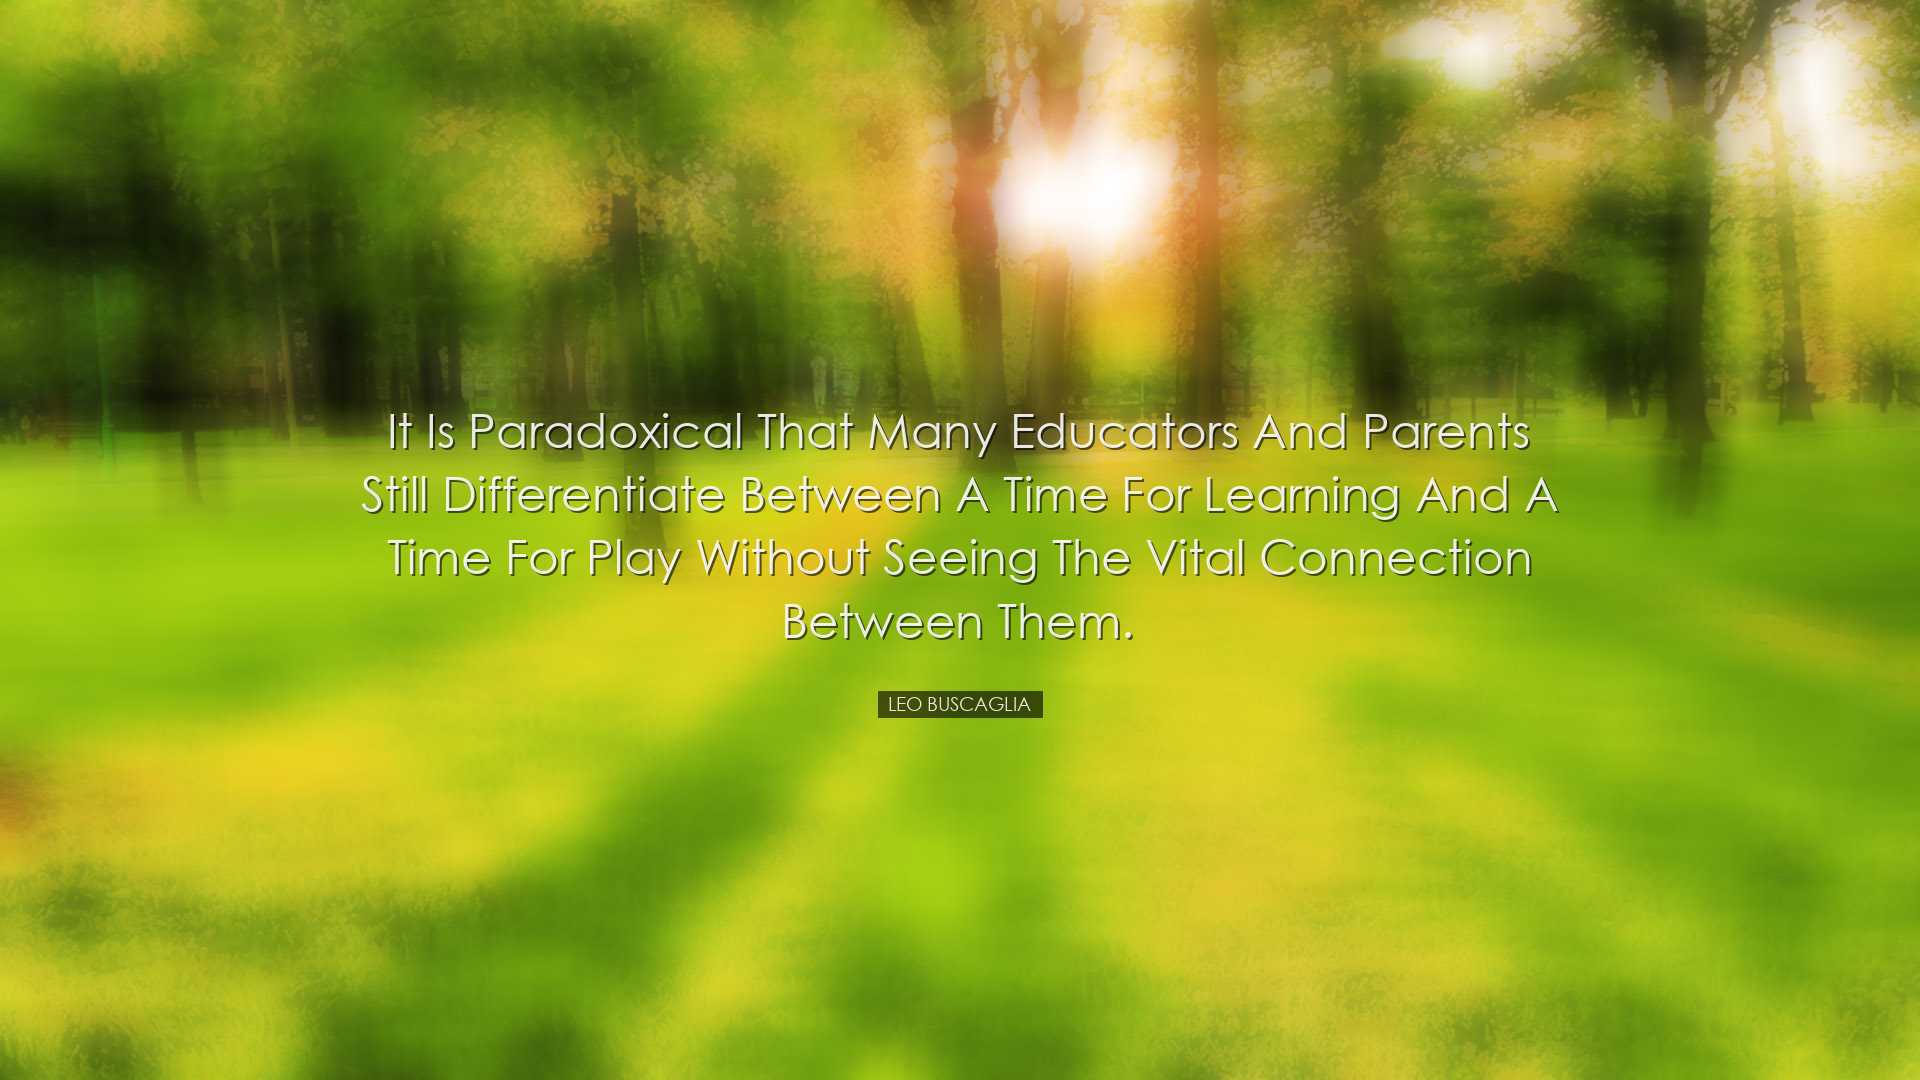 It is paradoxical that many educators and parents still differenti